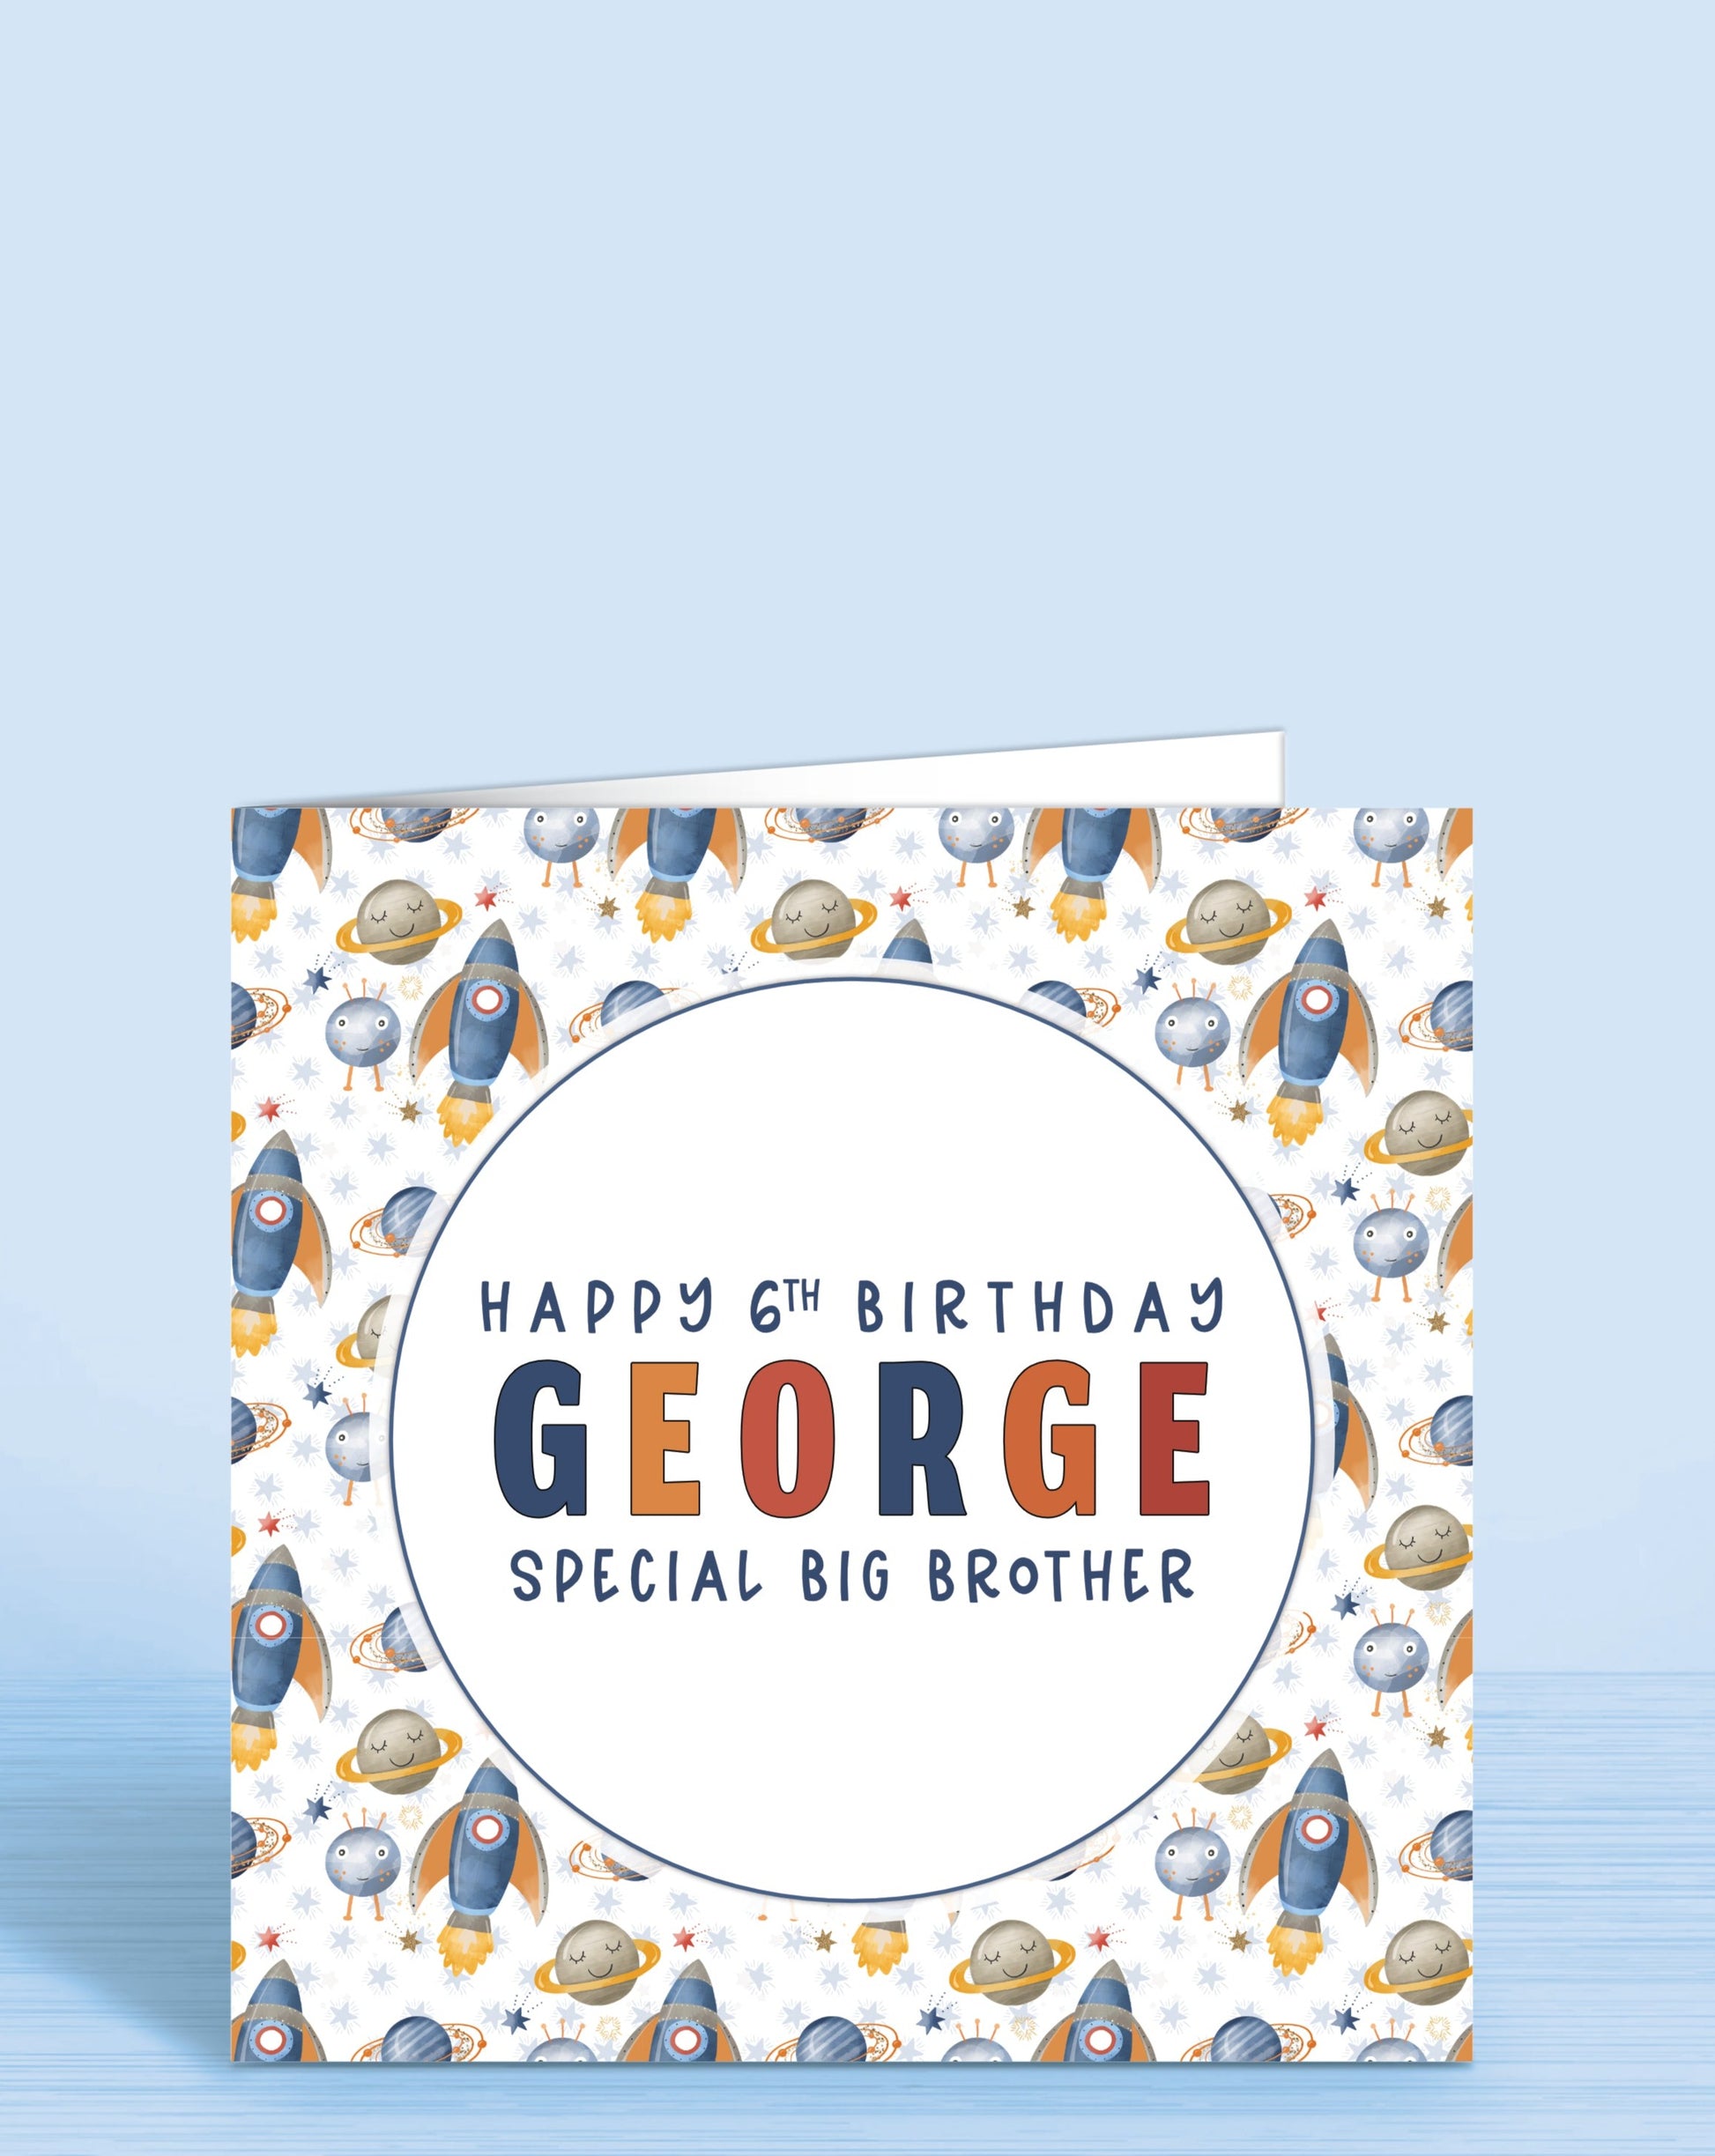 Space Rocket Personalised Birthday Card for Boys or Girls, Any Age, Any Relation, Add a Name, Happy 6th Birthday, Special Big Brother | Oliver Rose Designs